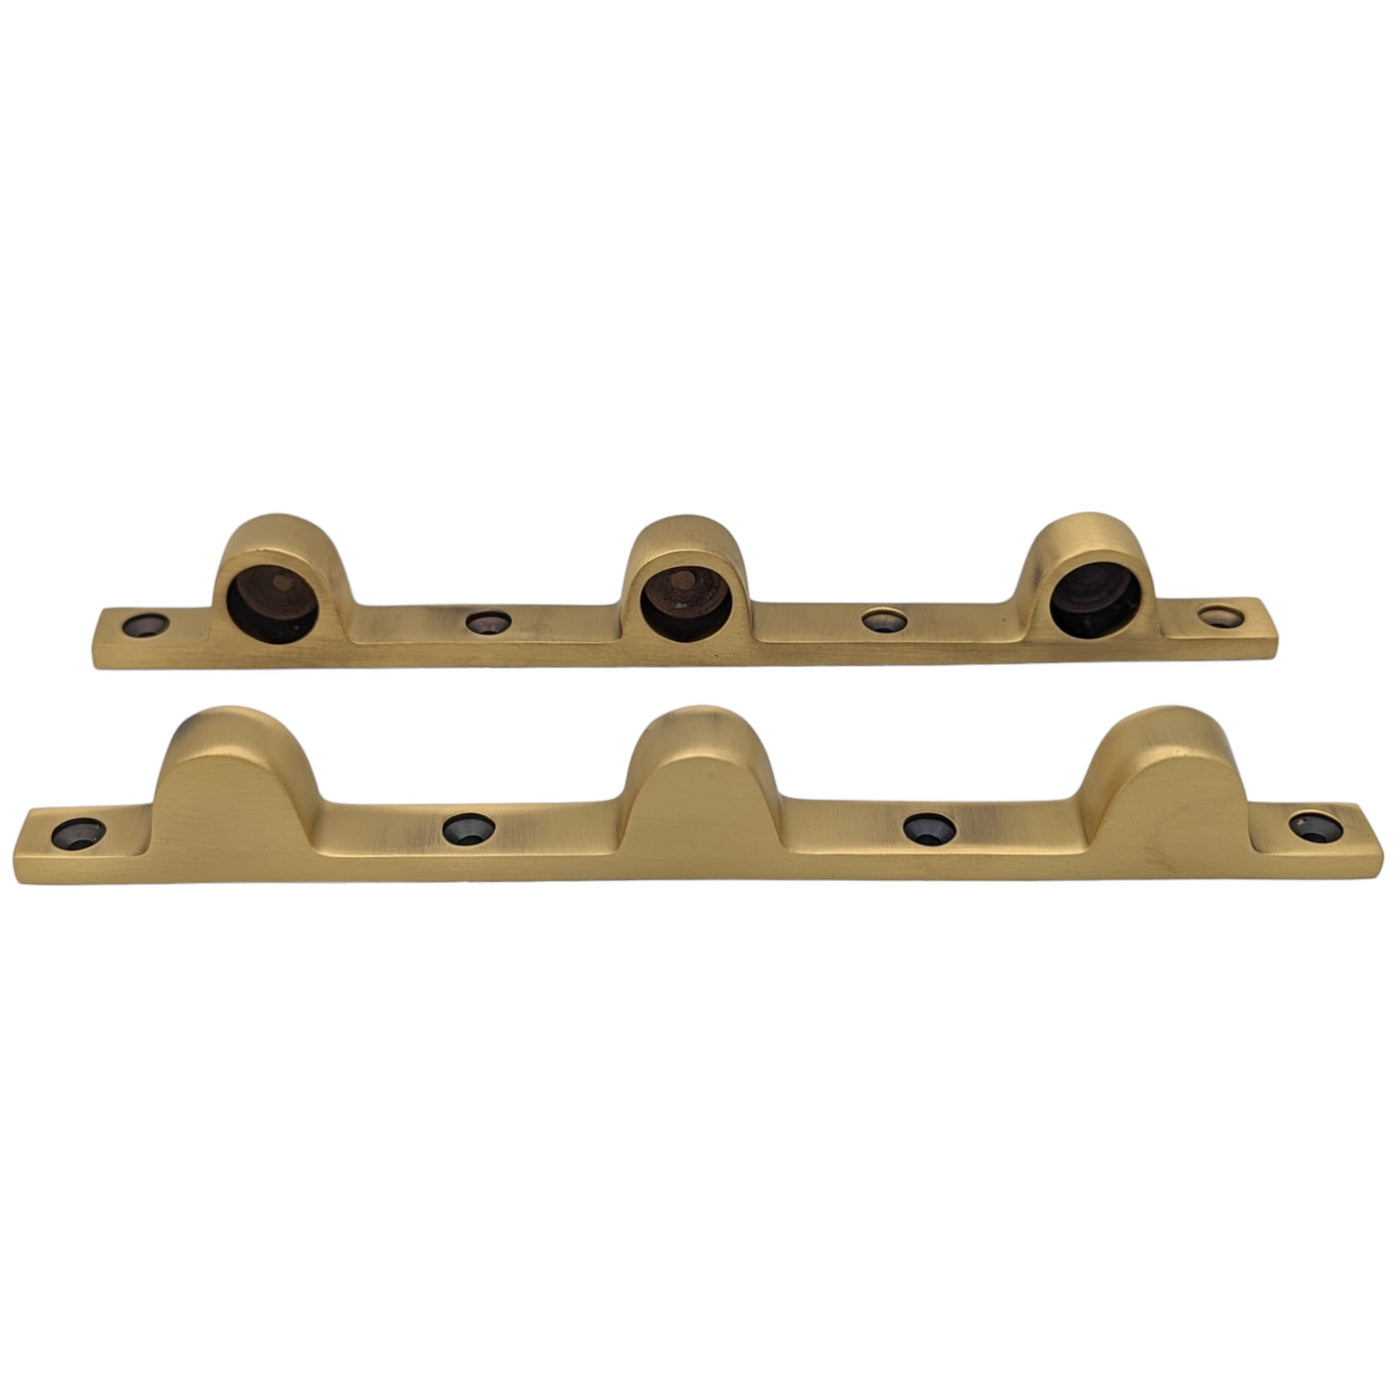 Pair Solid Brass Security Triple Push Bar Bracket Ends